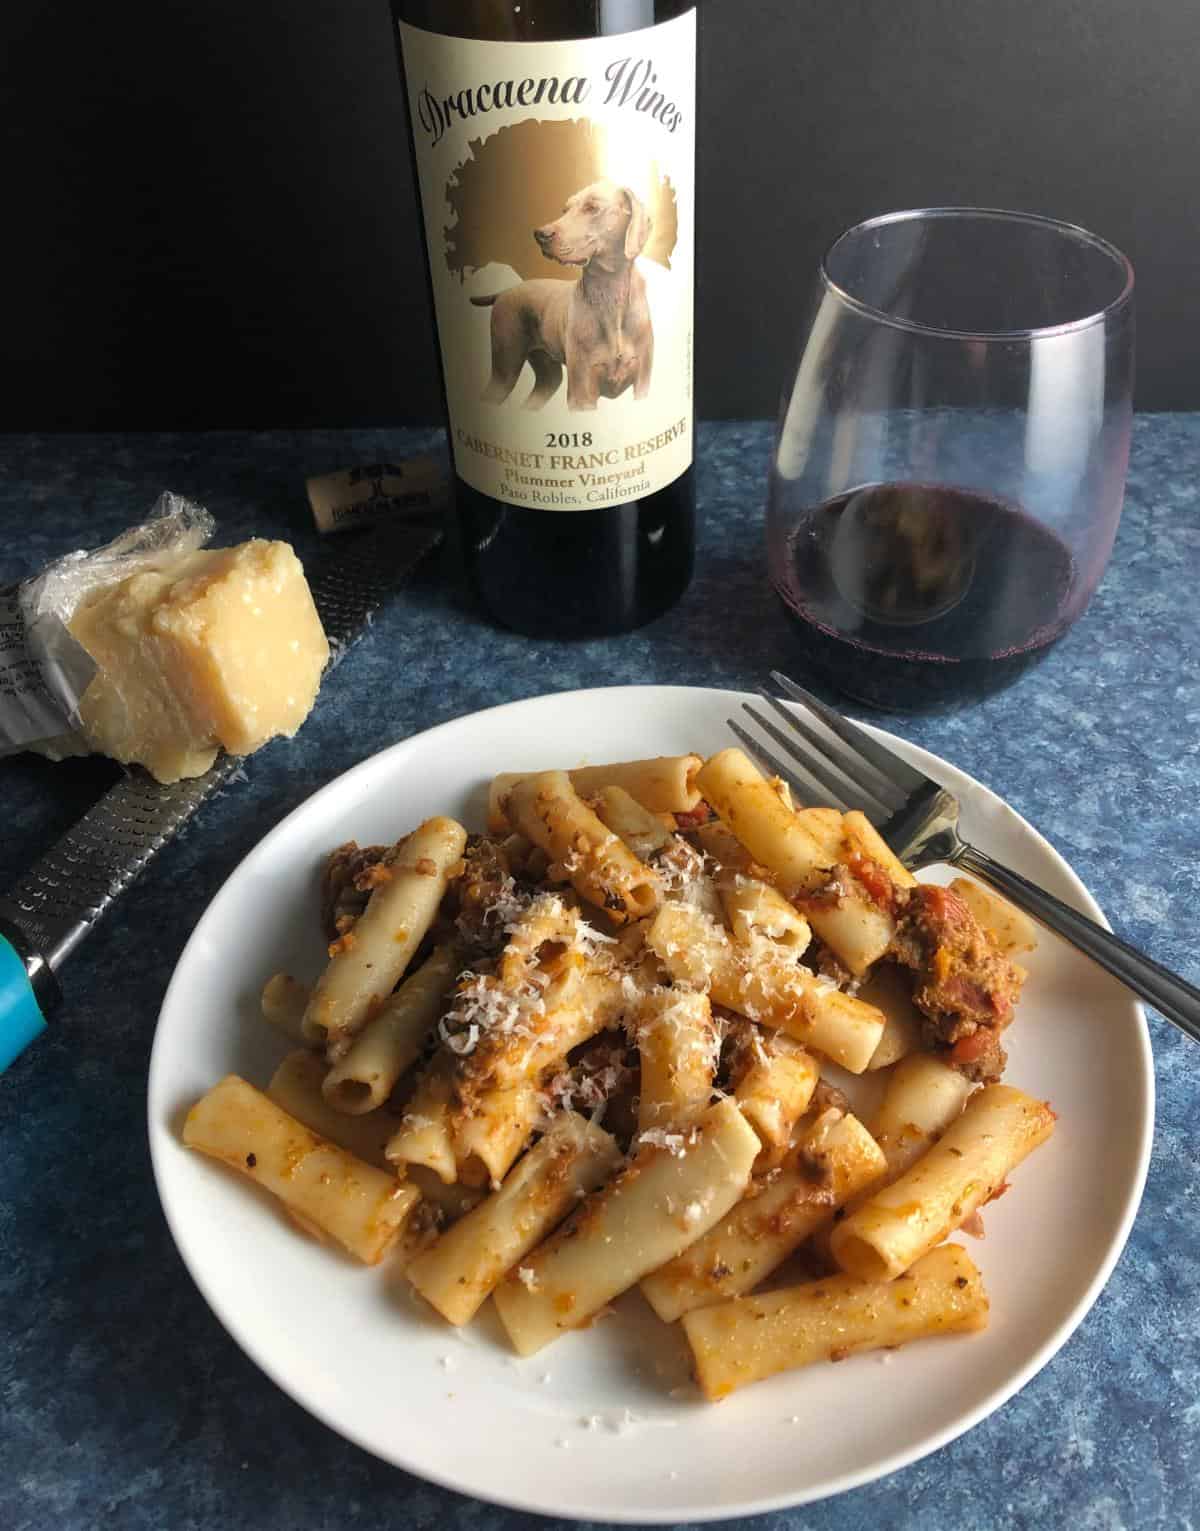 plate of bolognese pasta served with a bottle of Cabernet Franc.